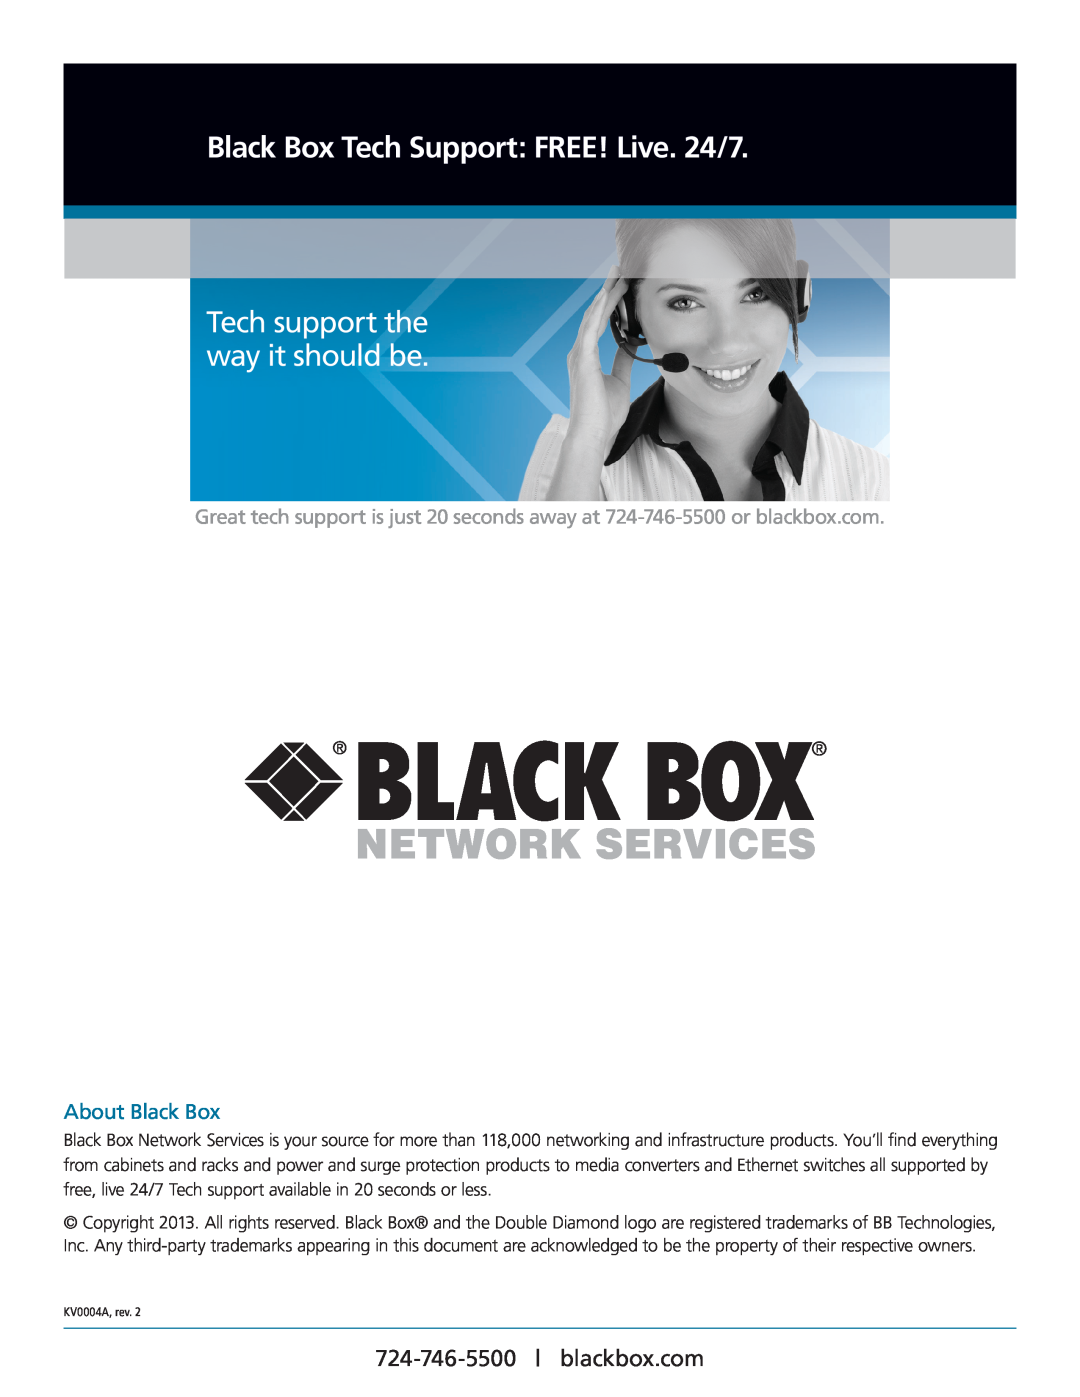 Black Box ServSwitch Freedom, KV0004A manual About Black Box, Network Services, Black Box Tech Support FREE! Live. 24/7 